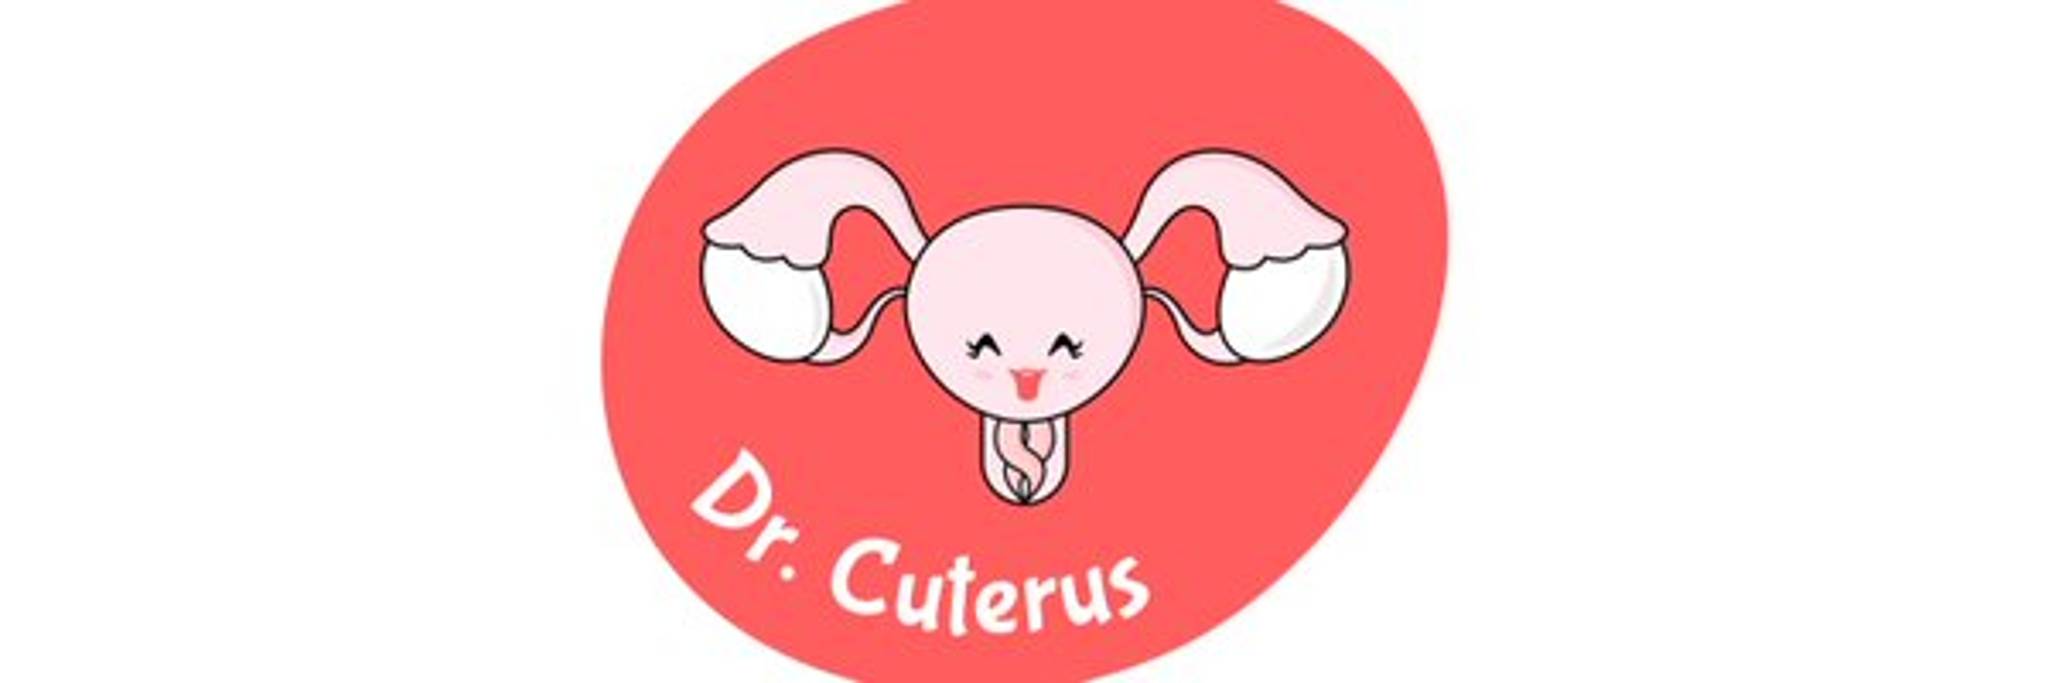 Dr. Cuterus: demystifying sex for young Indians